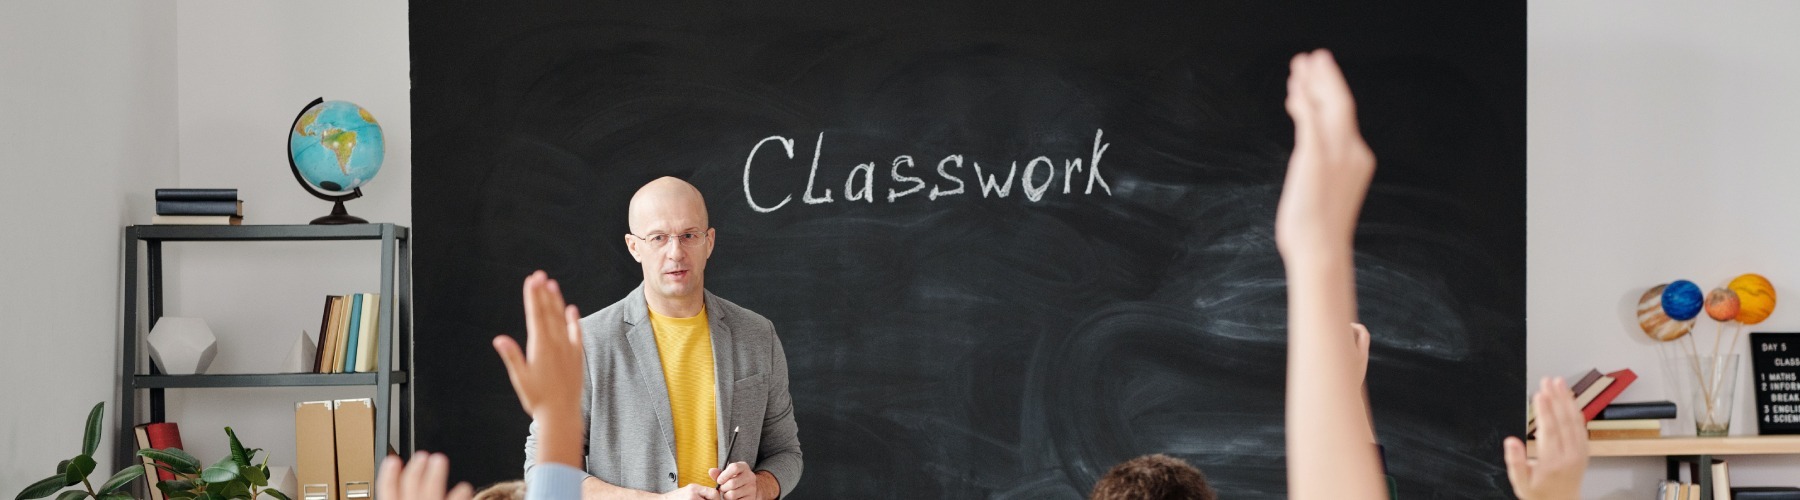 a teacher stands in front of a blackboard that reads "classwork" while several students raise their hand to ask or answer a question